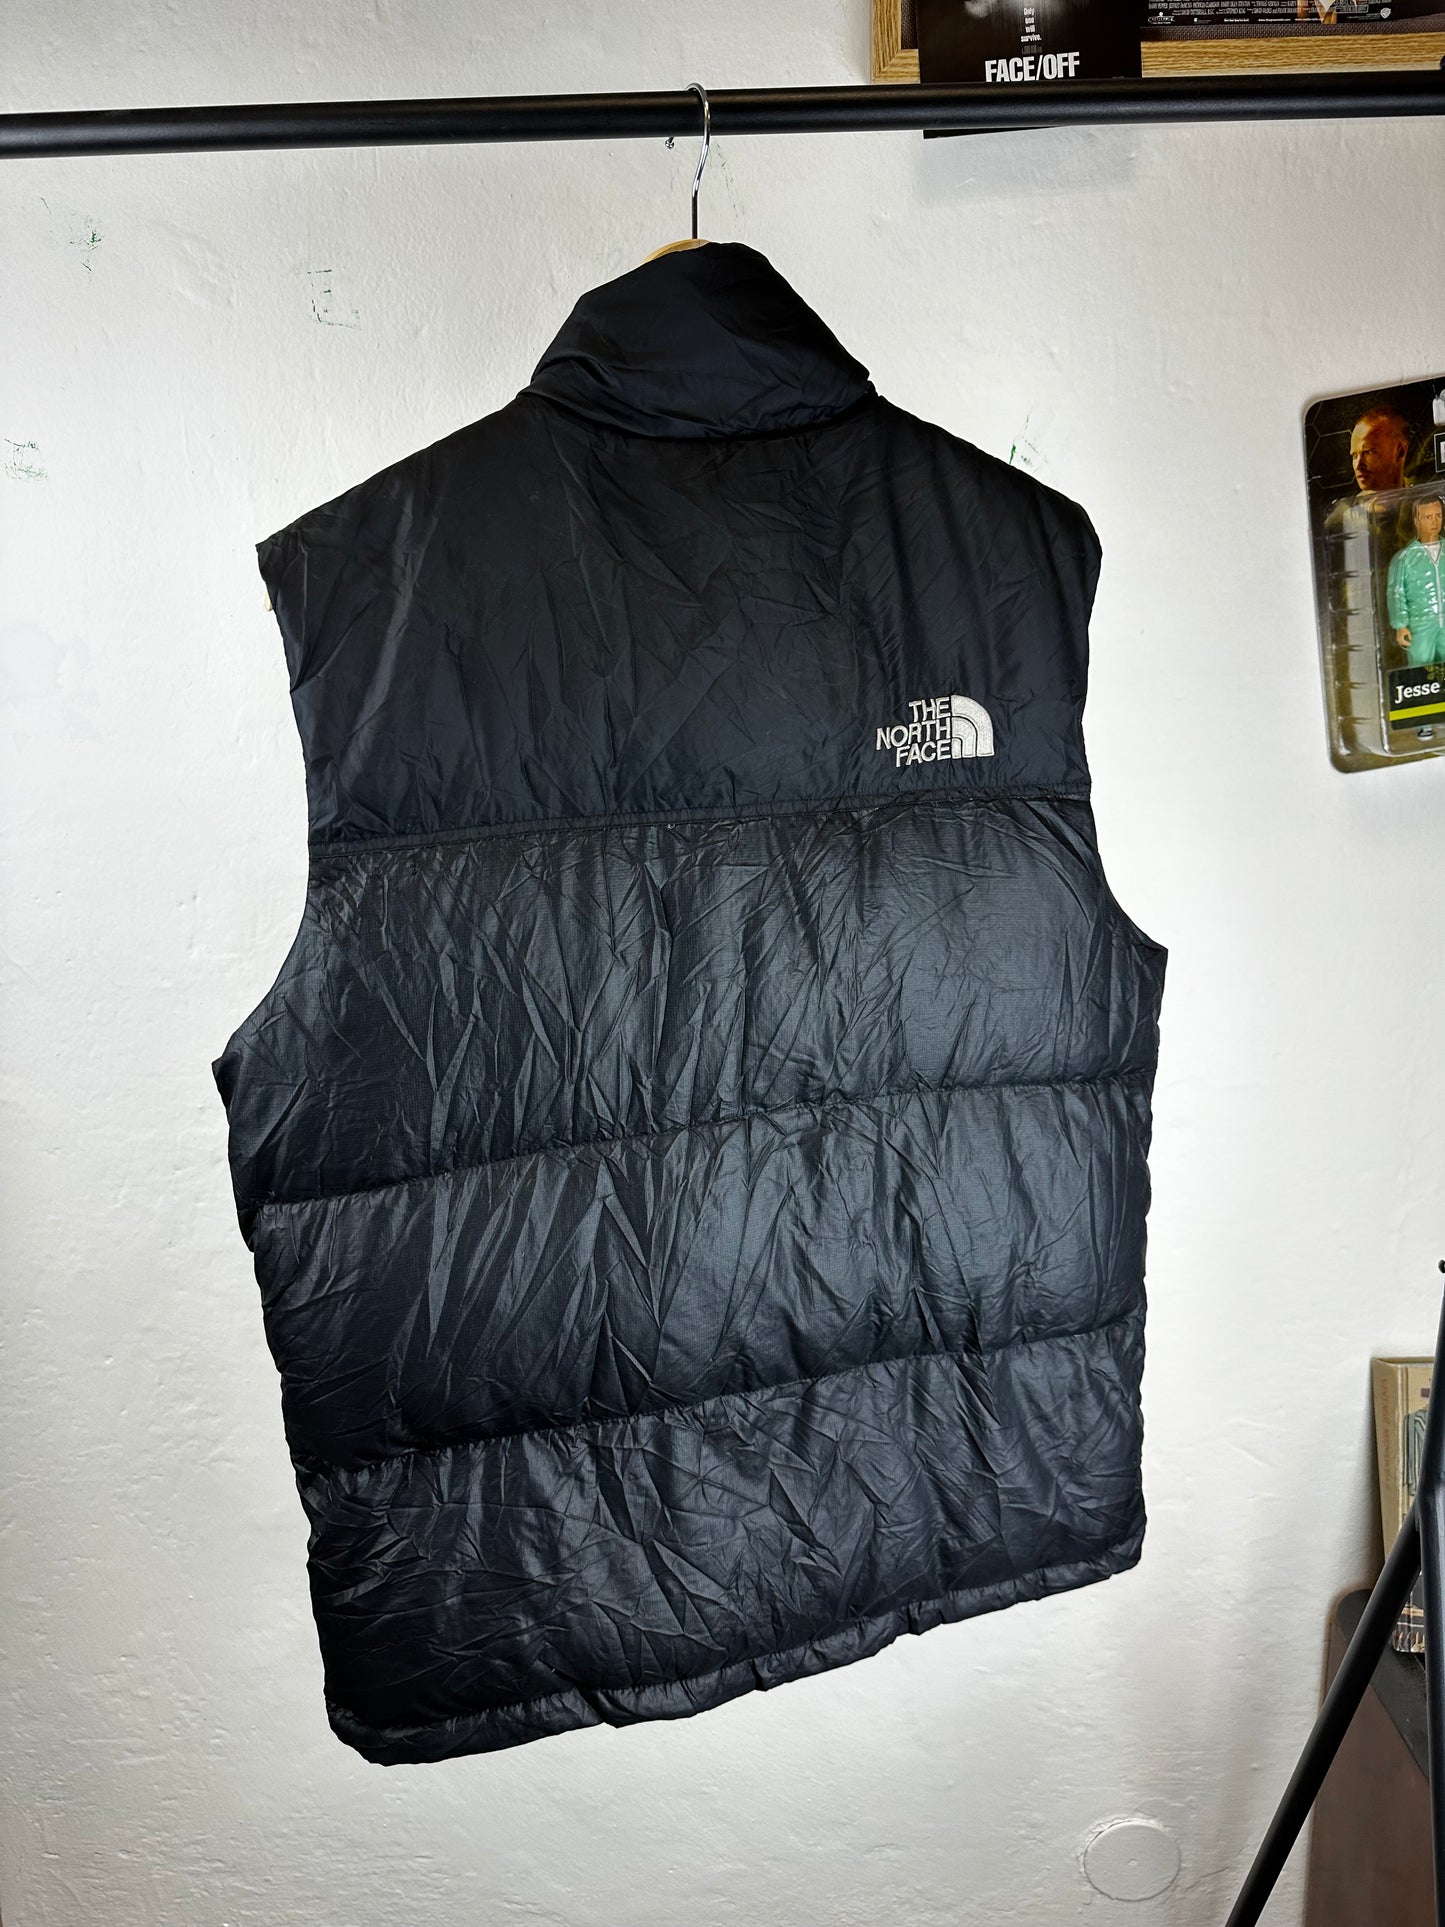 North Face Puffer Vest - size S